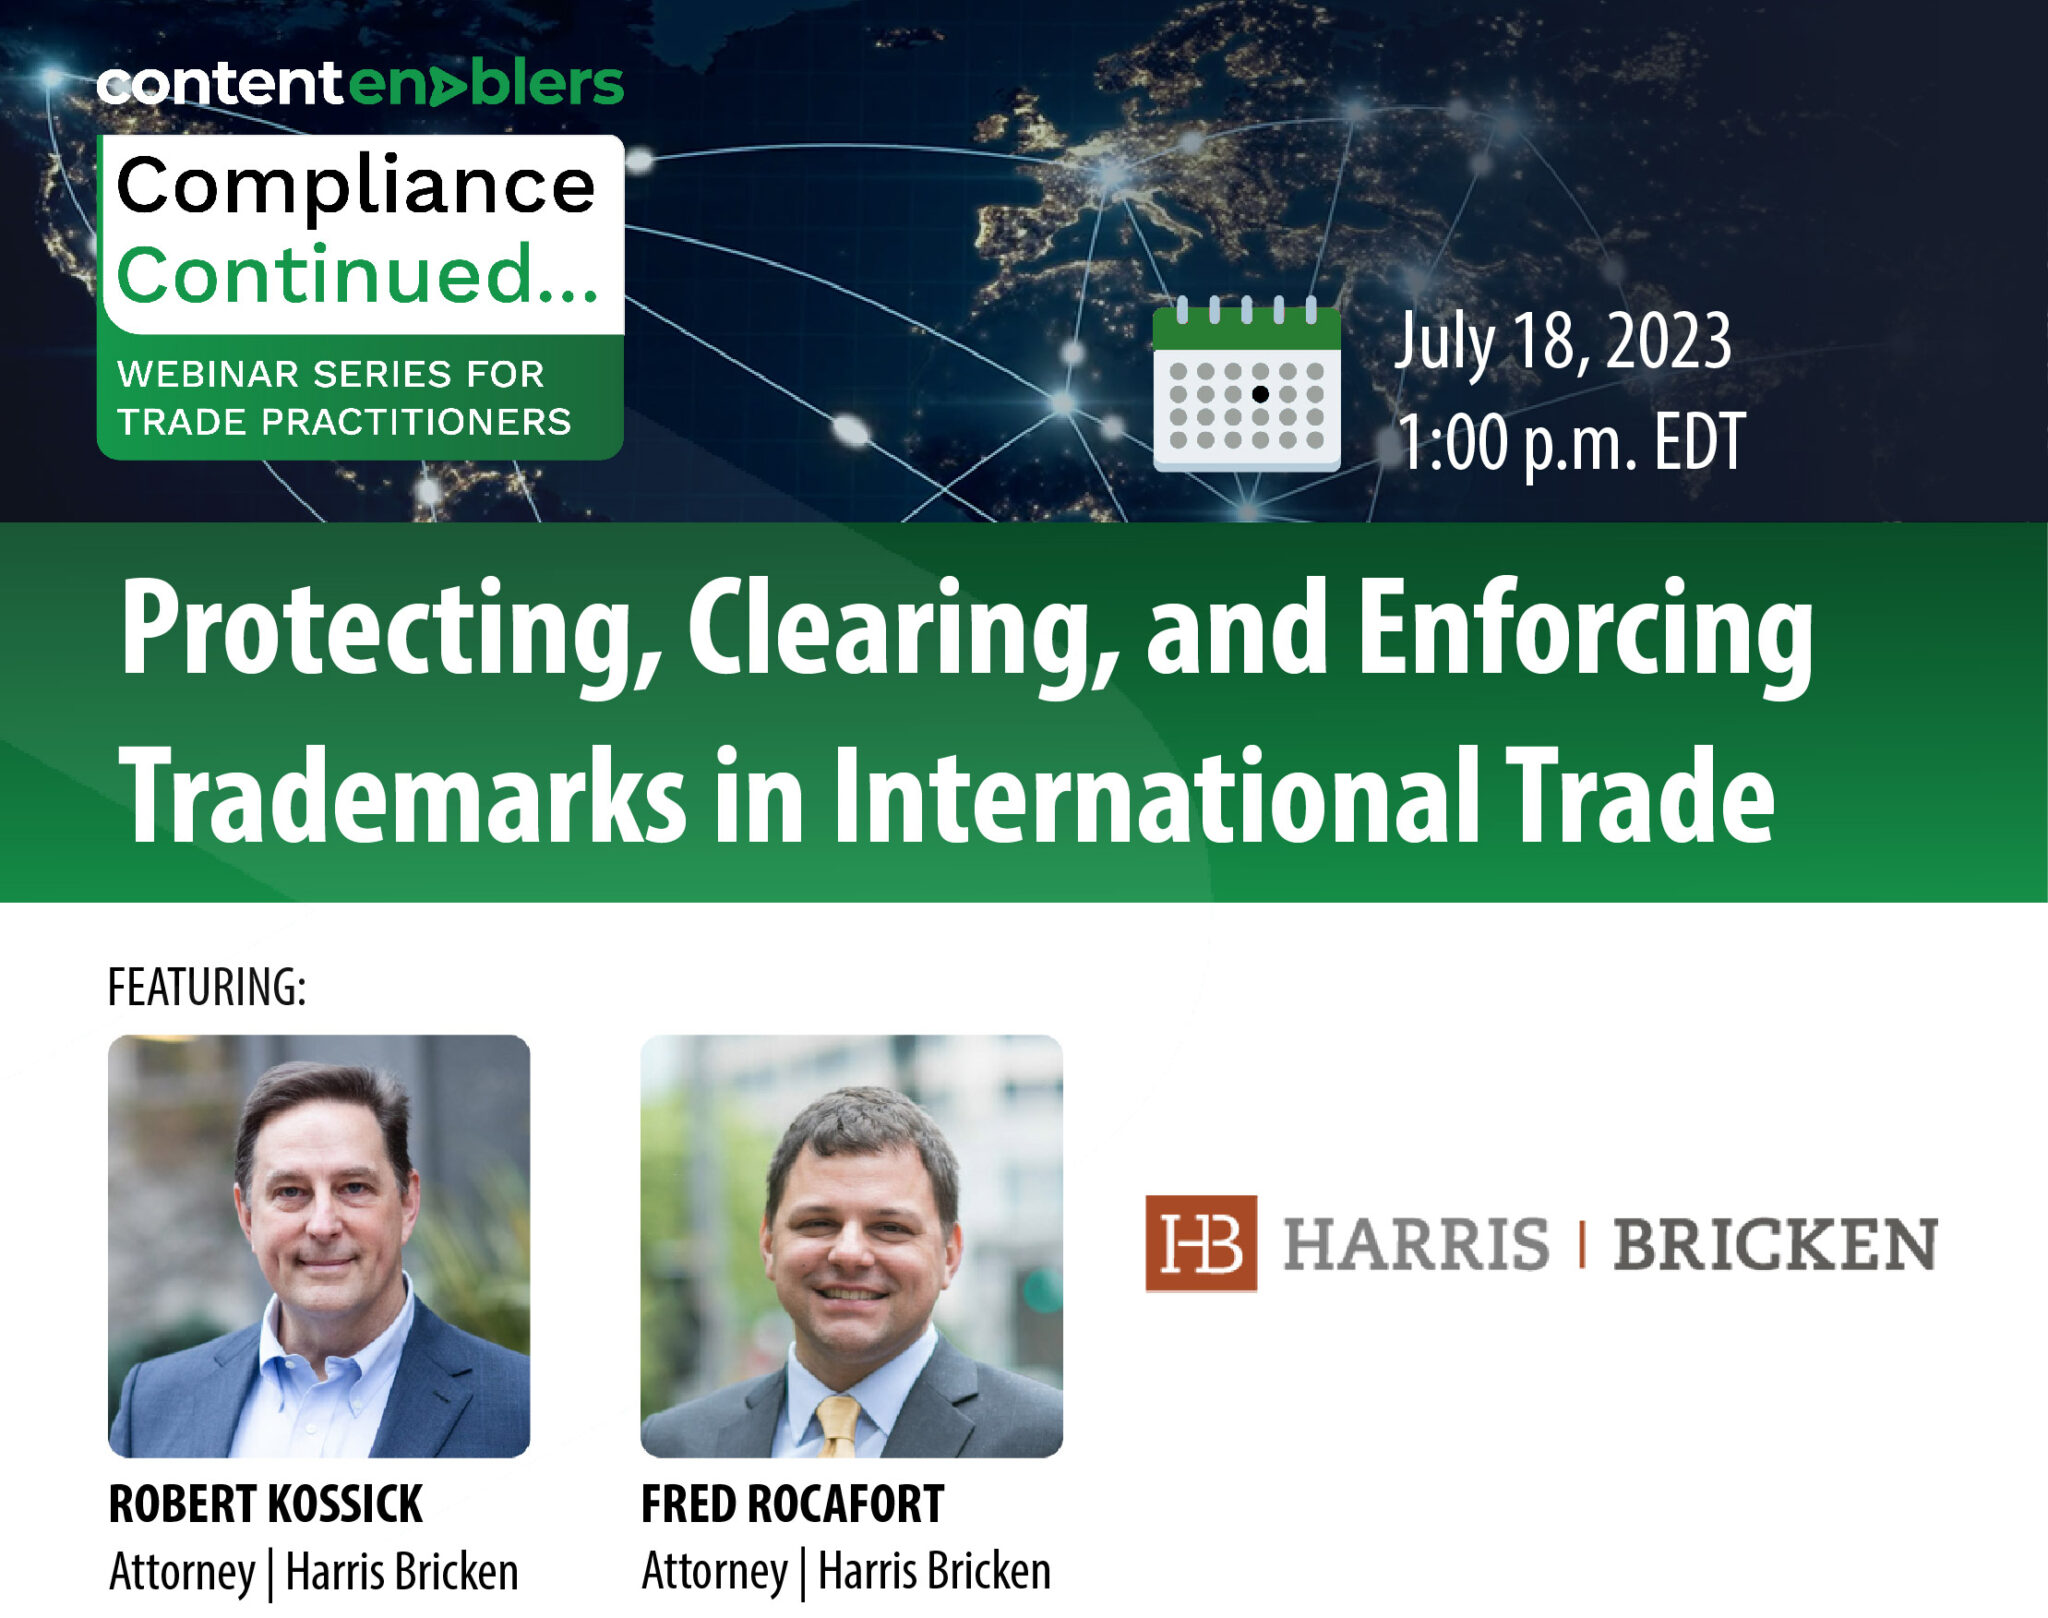 Protecting, Clearing, and Enforcing Trademarks in International Trade